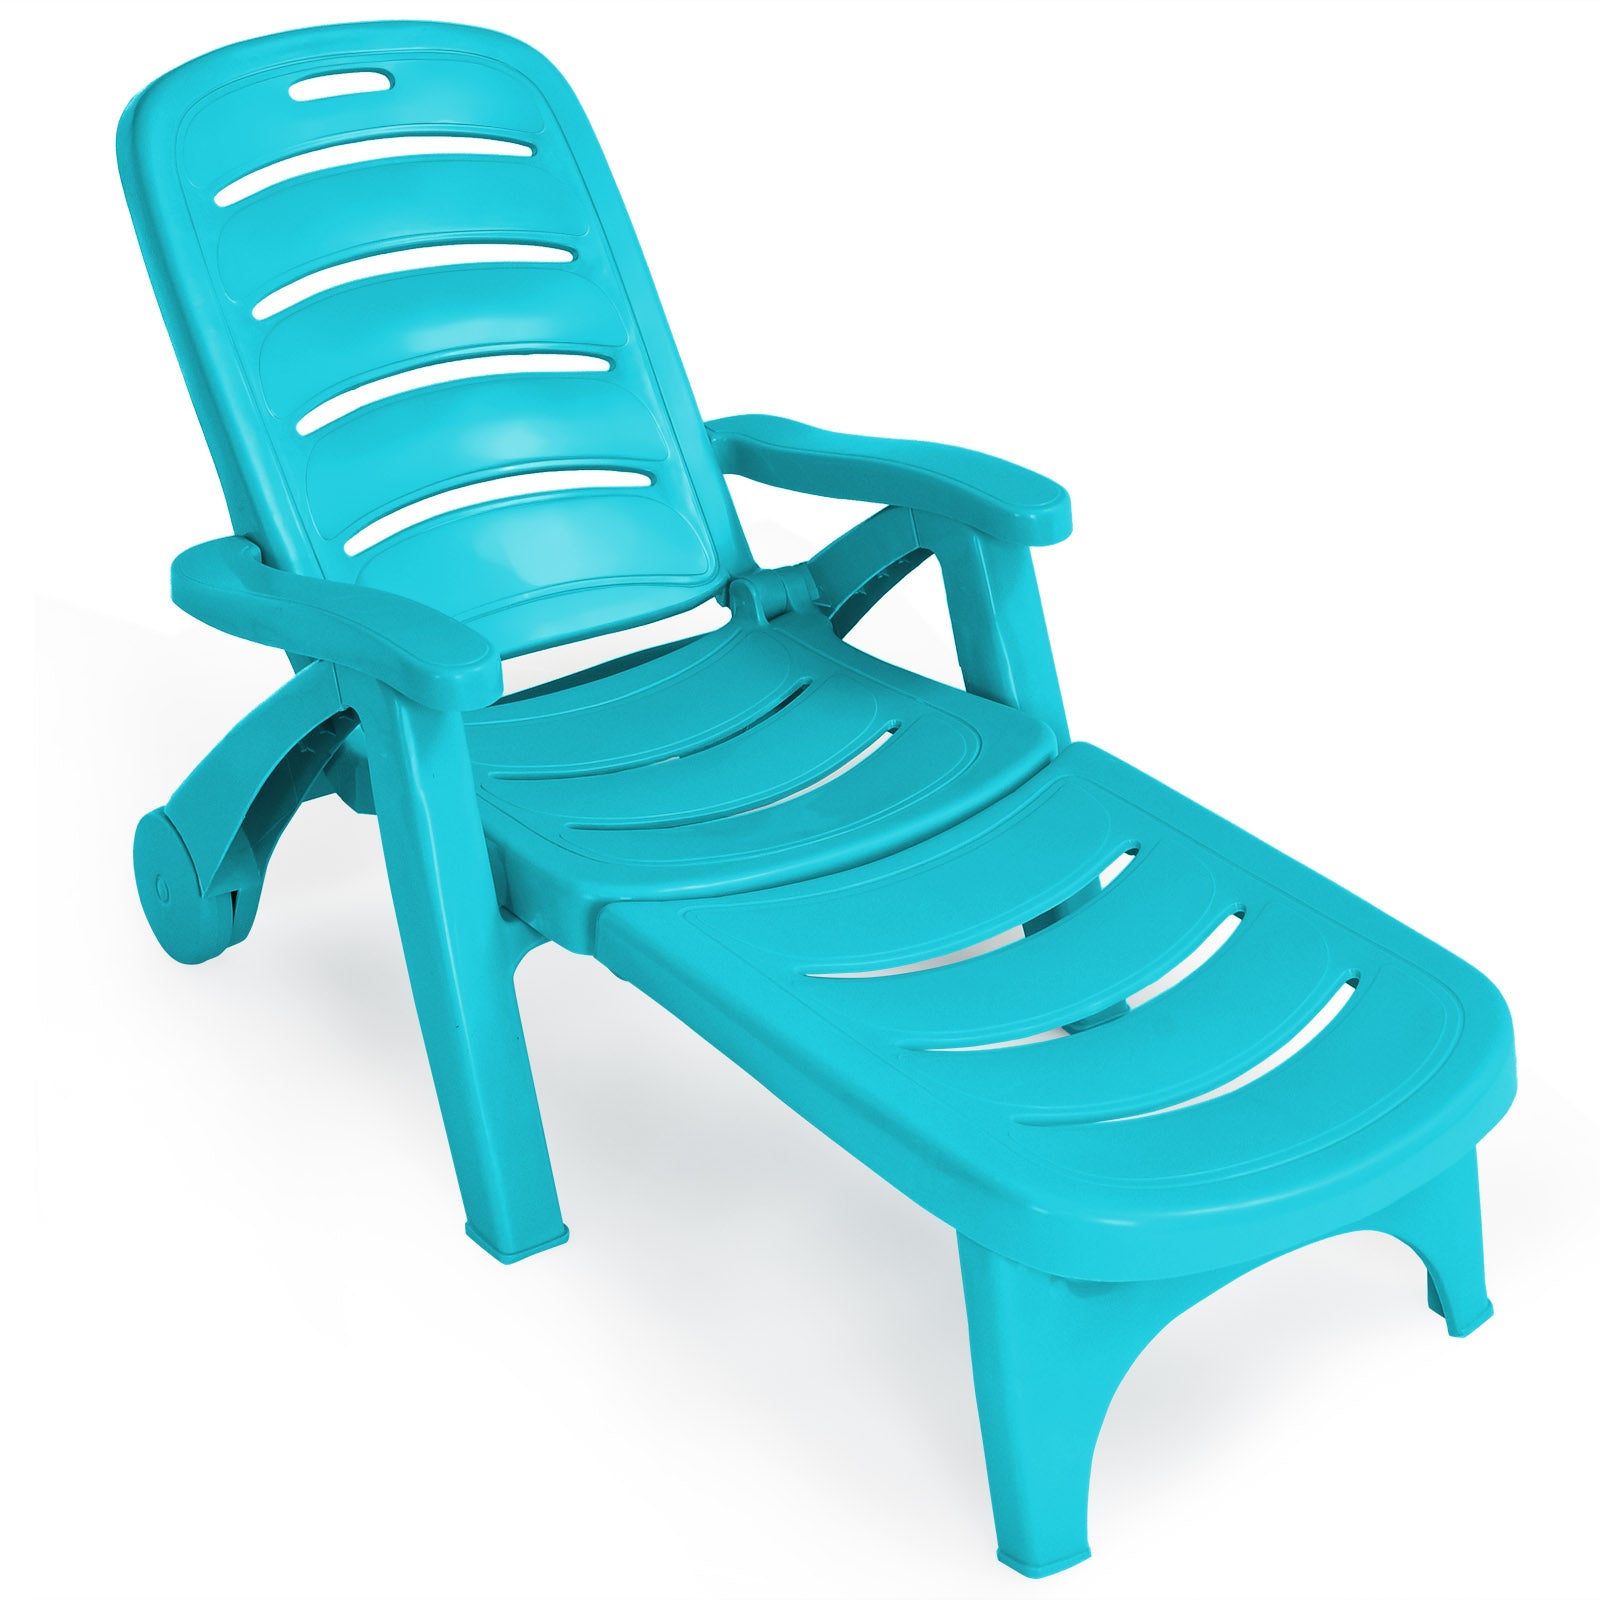 Adjustable Chaise Lounge Chair with Built-In Wheels-Turquoise